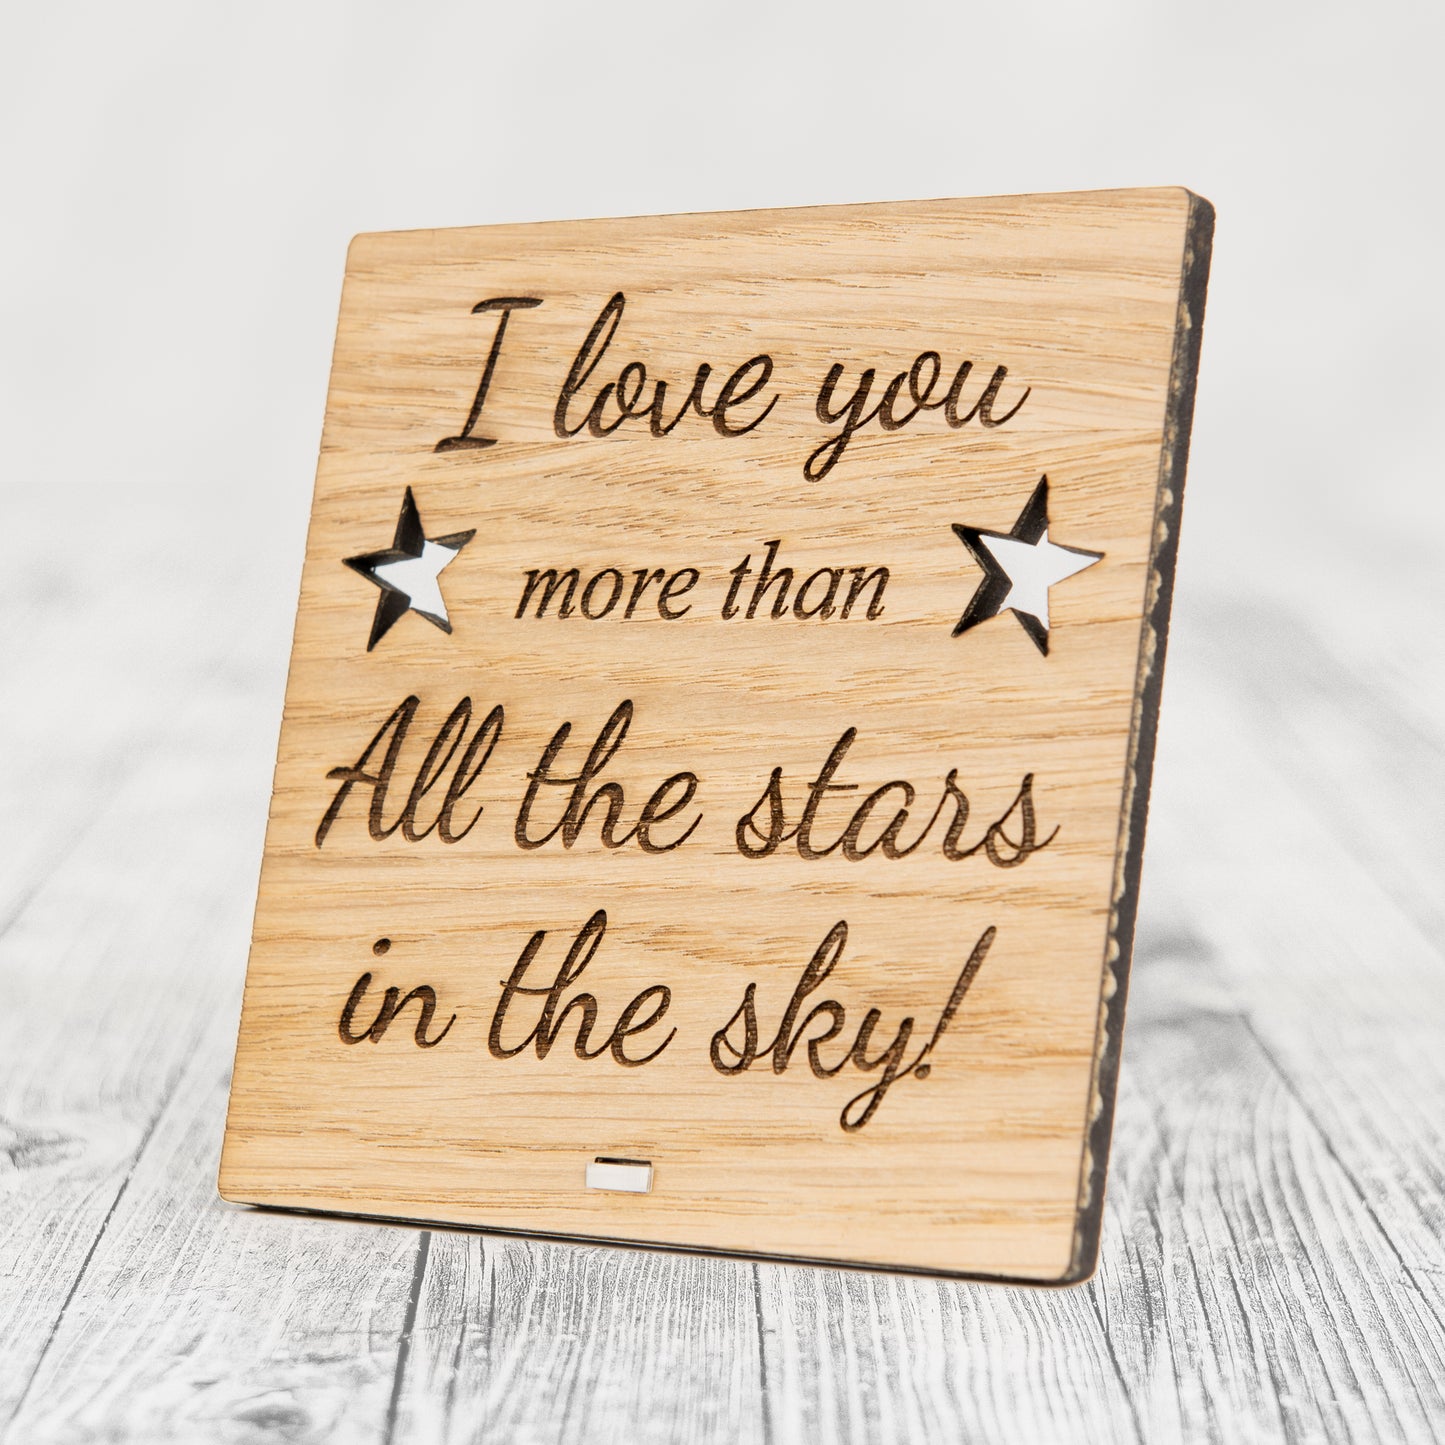 I Love You More Than All The STARS IN THE SKY - Wooden Valentine's Day Plaque